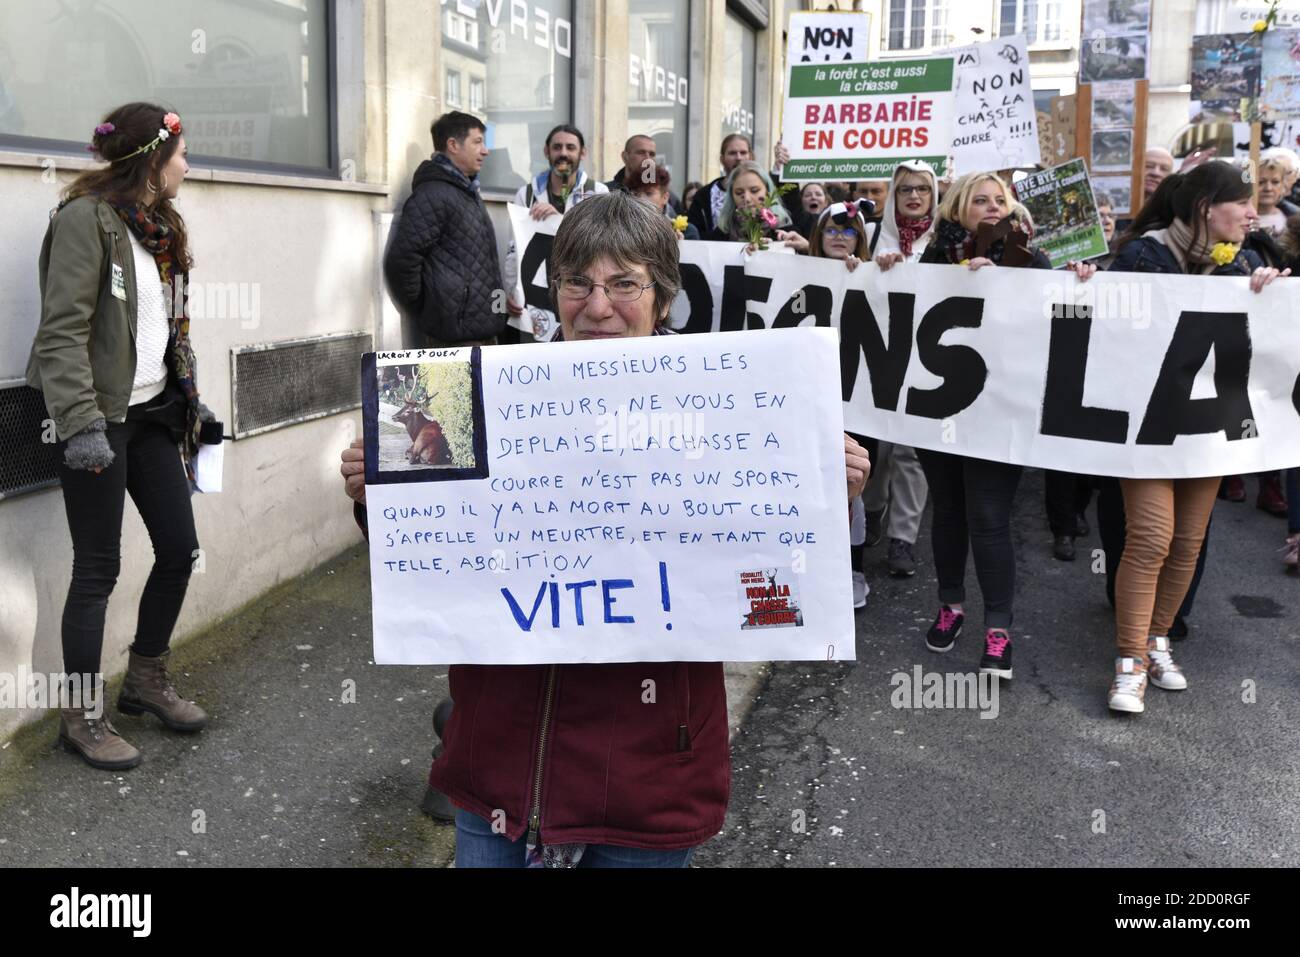 A thousand people from all over France take part in an anti-hunting with hounds demonstration, on March 31, 2018 in Compiegne, France. They respond to the call of collective AVA Picardie (Abolissons la Venerie Aujourd'hui). The AVA activists have been disturbing for several months hunting in the forest of Compiegne. Photo by Edouard Bernaux/ABACAPRESS.COM Stock Photo